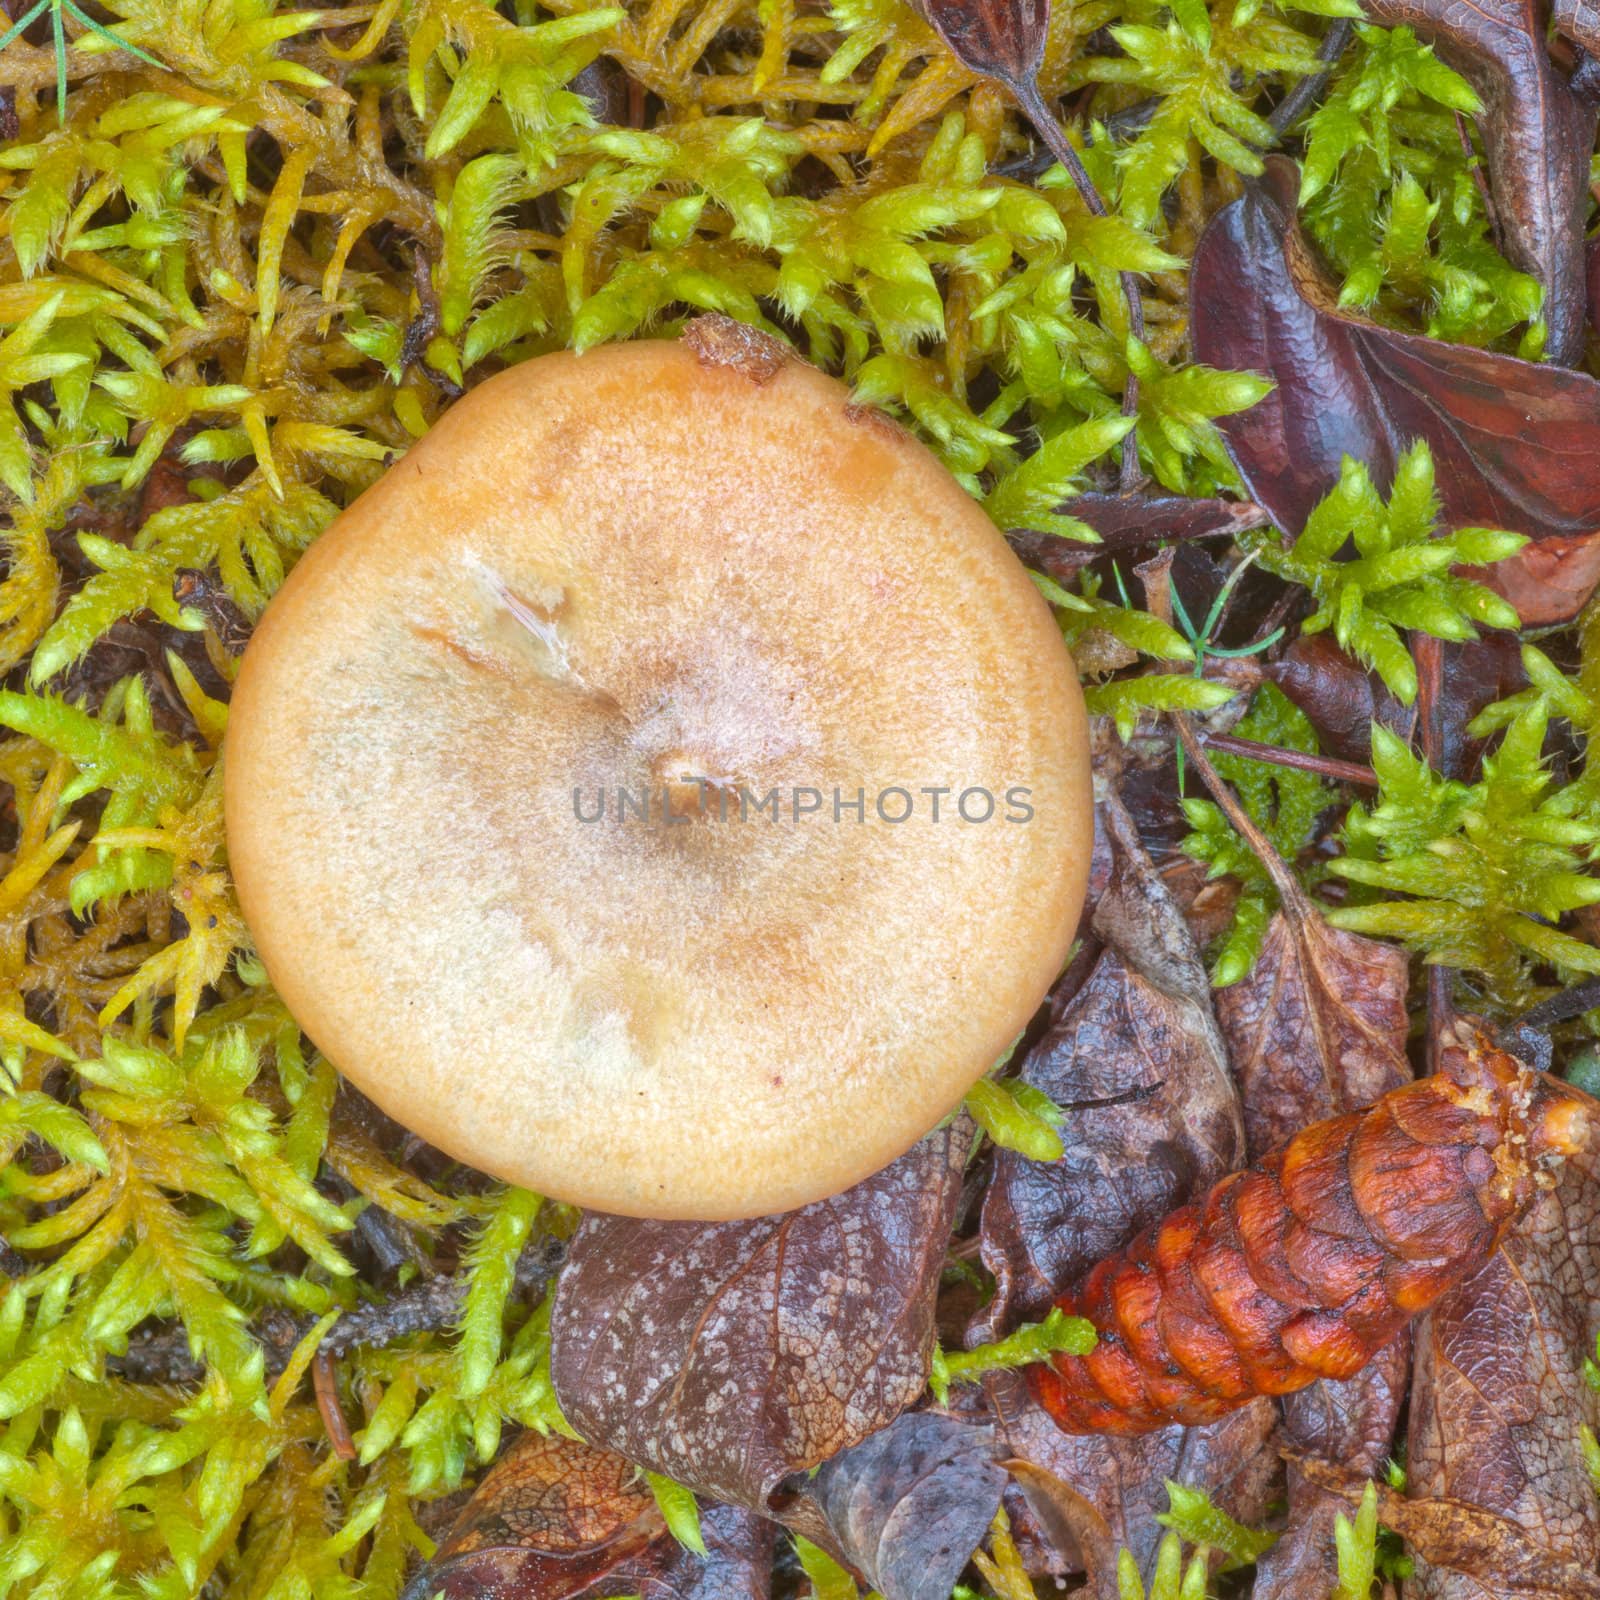 Edible Delicious Milk Cap Mushroom, Lactarius deliciosus, growing among moss and leafy plants on green forest floor